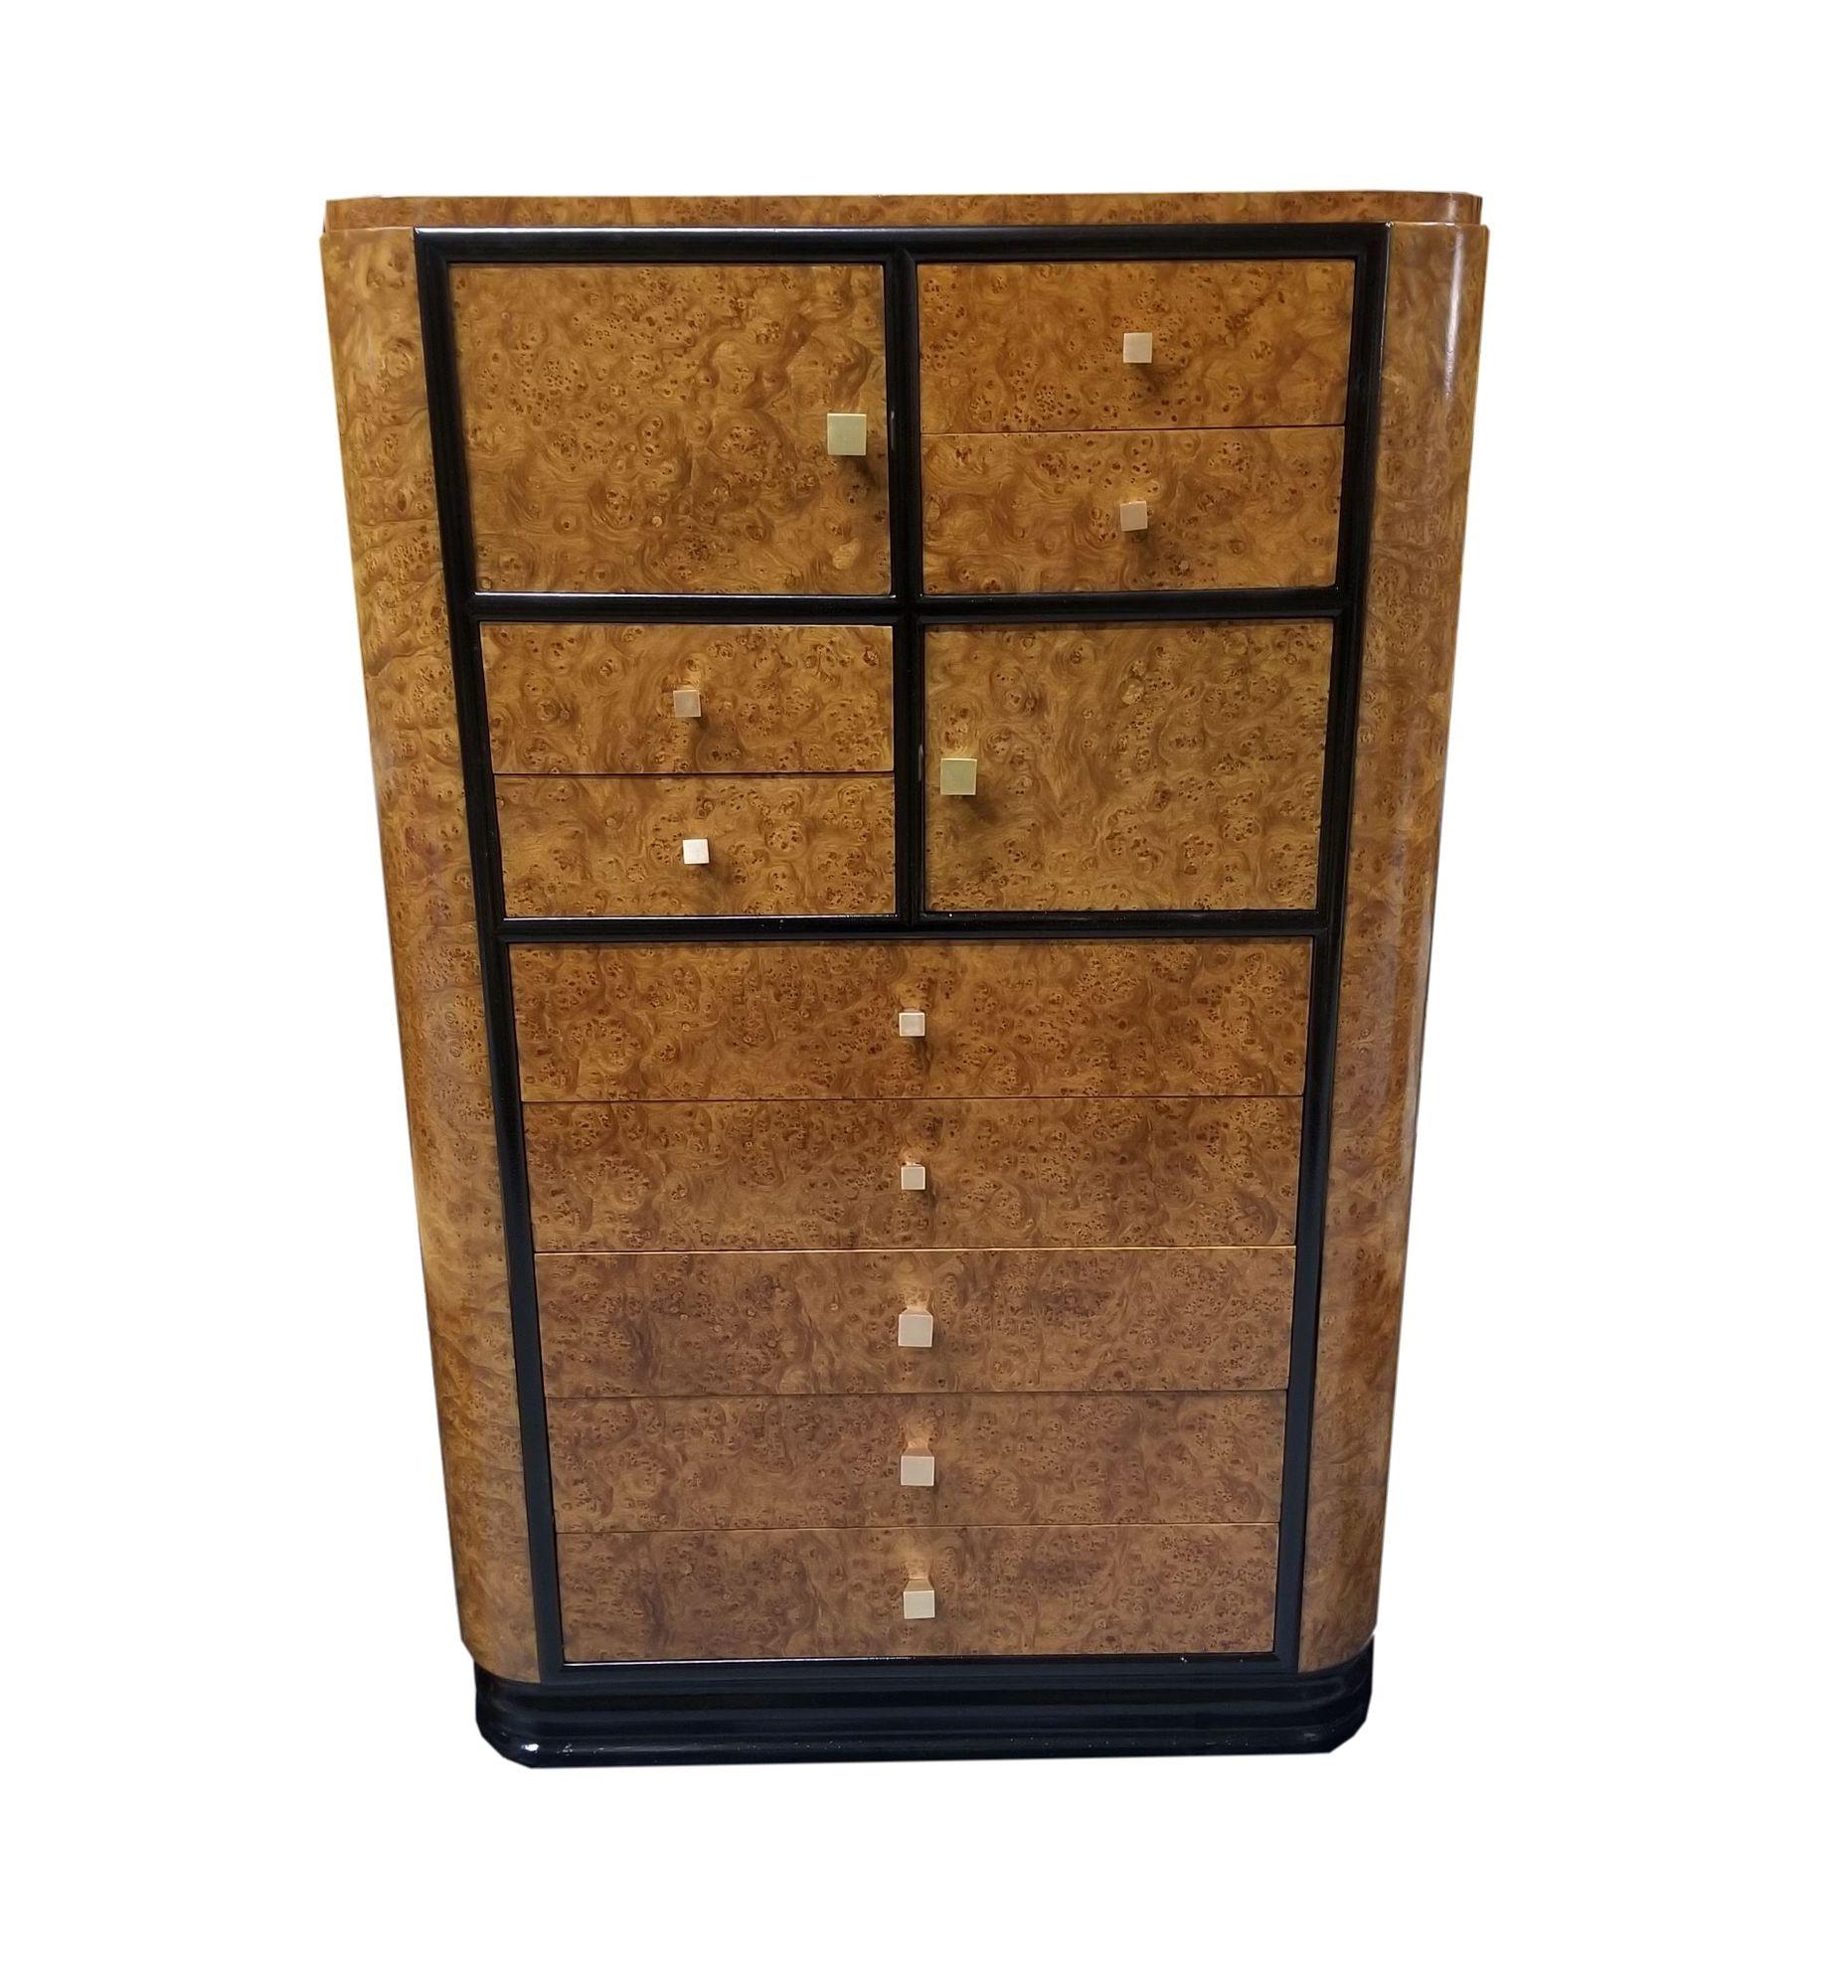 Original English European high-style Art Deco bronze highboy dresser featuring a stepped black lacquer base, black trim, and bird's-eye maple body. Each drawer features custom-made solid cast bronze pulls.

Measurements:

Height: 51.5